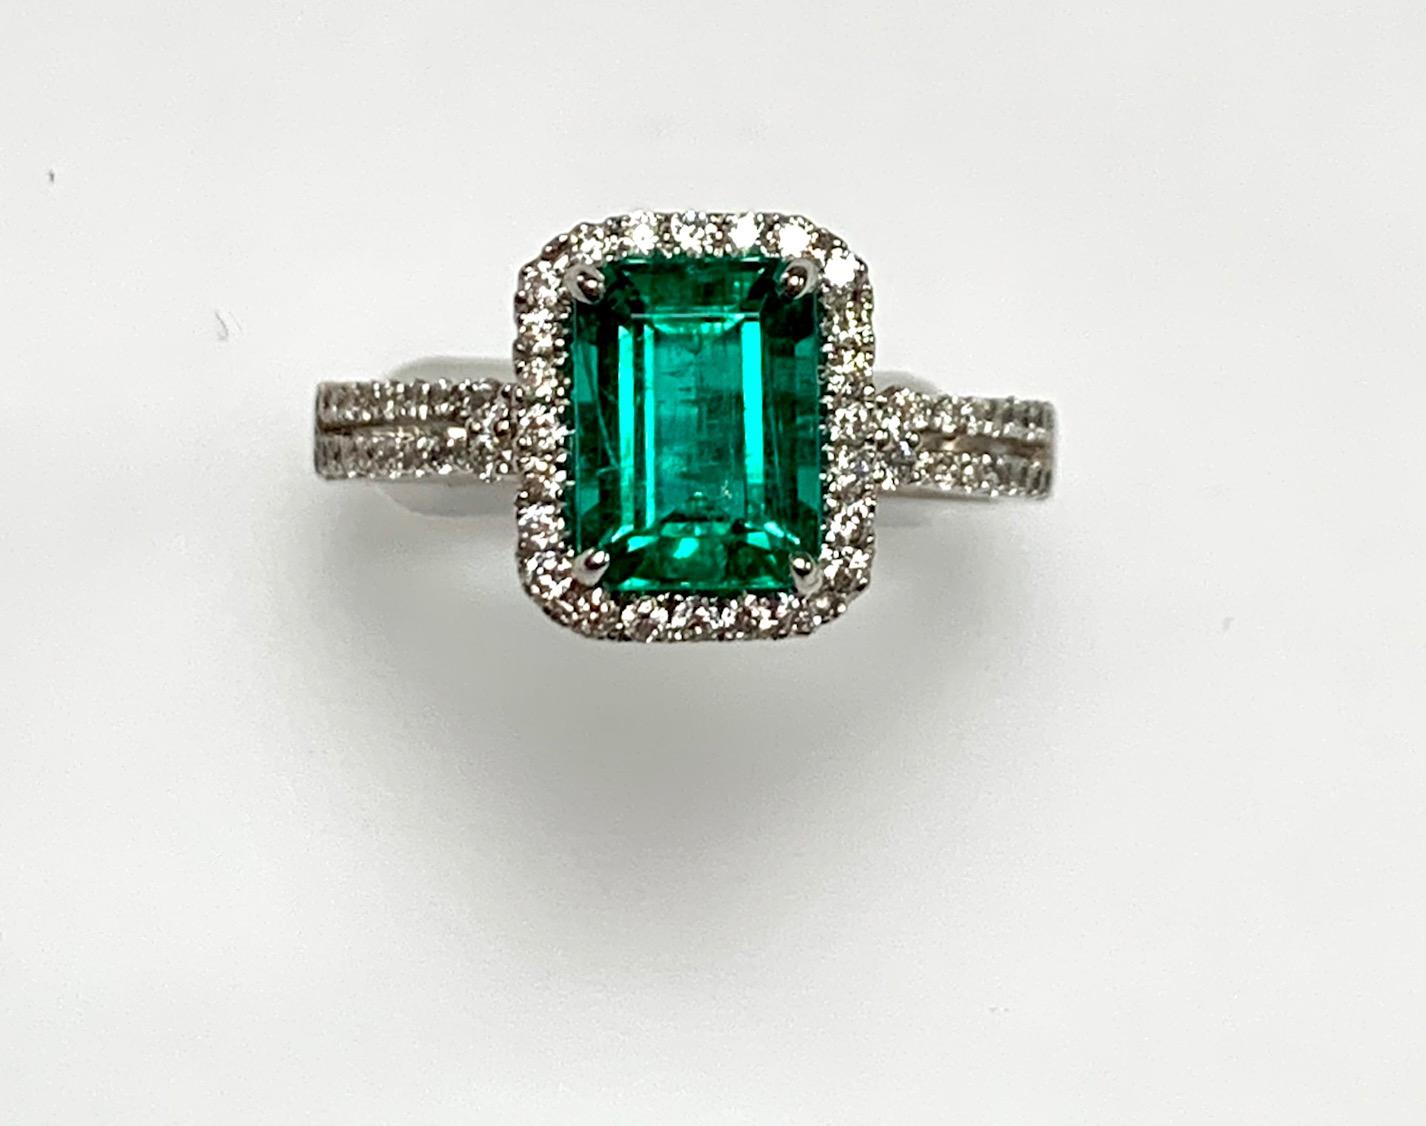 1.50 Carat Emerlad cut  emerald , zambian , set in 18k white gold ring with 0.48 carat of round diamonds around it and on the half way on split shank .